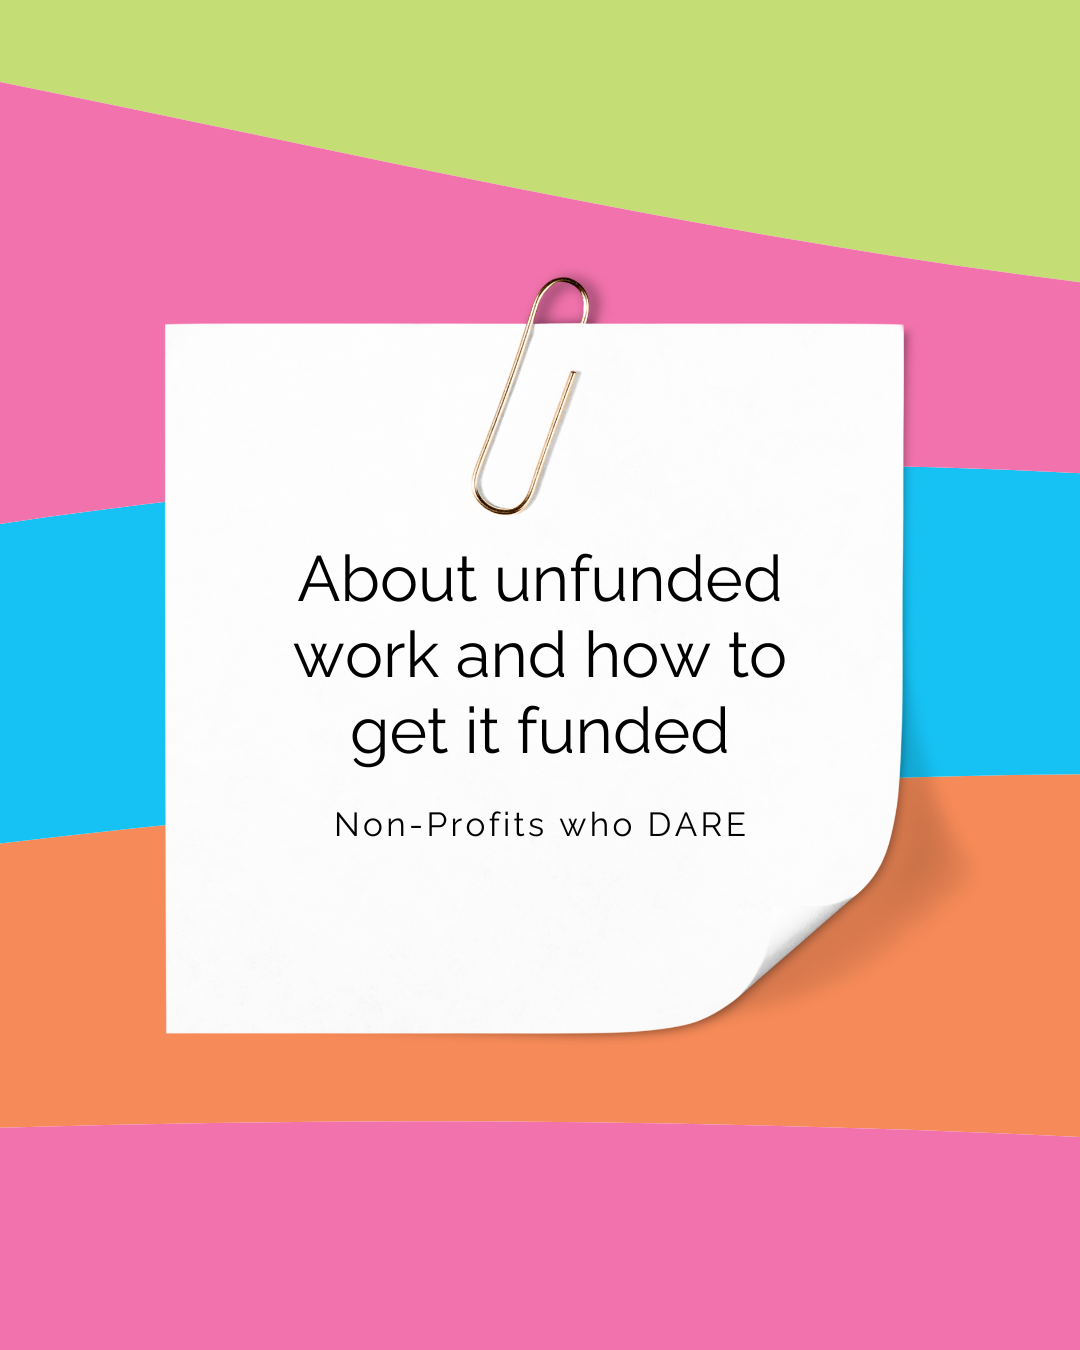 About unfunded work and how to get it funded